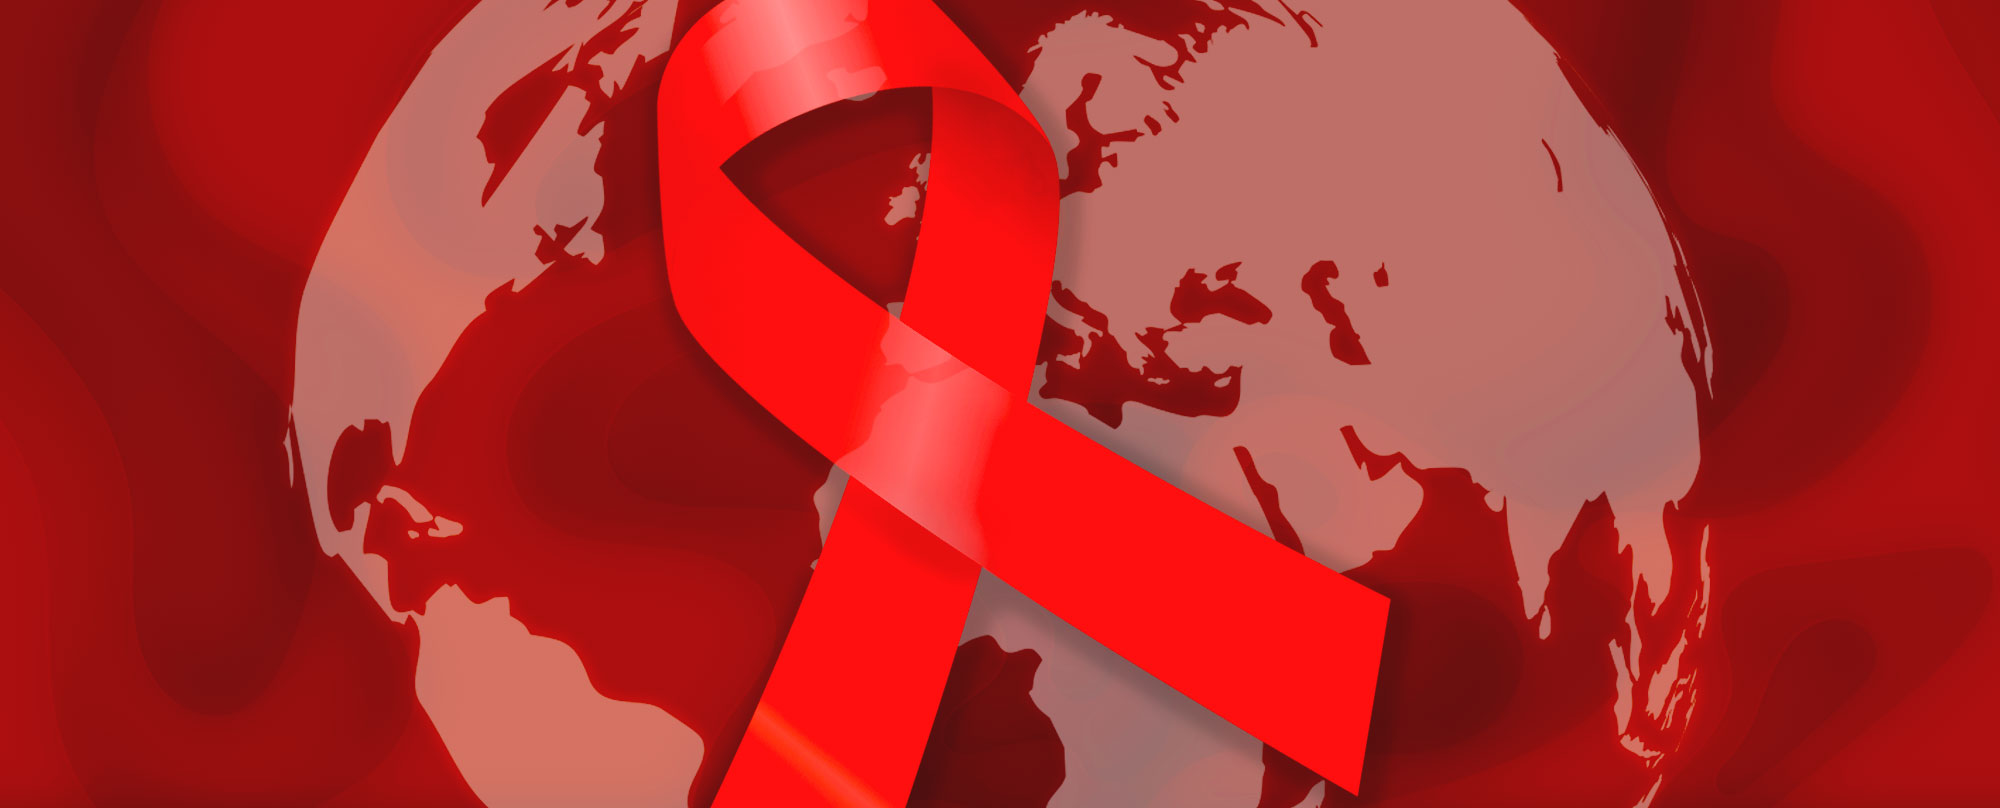 HIV/AIDS Around the World: Prevalence, New Infections, and the Fight for Control